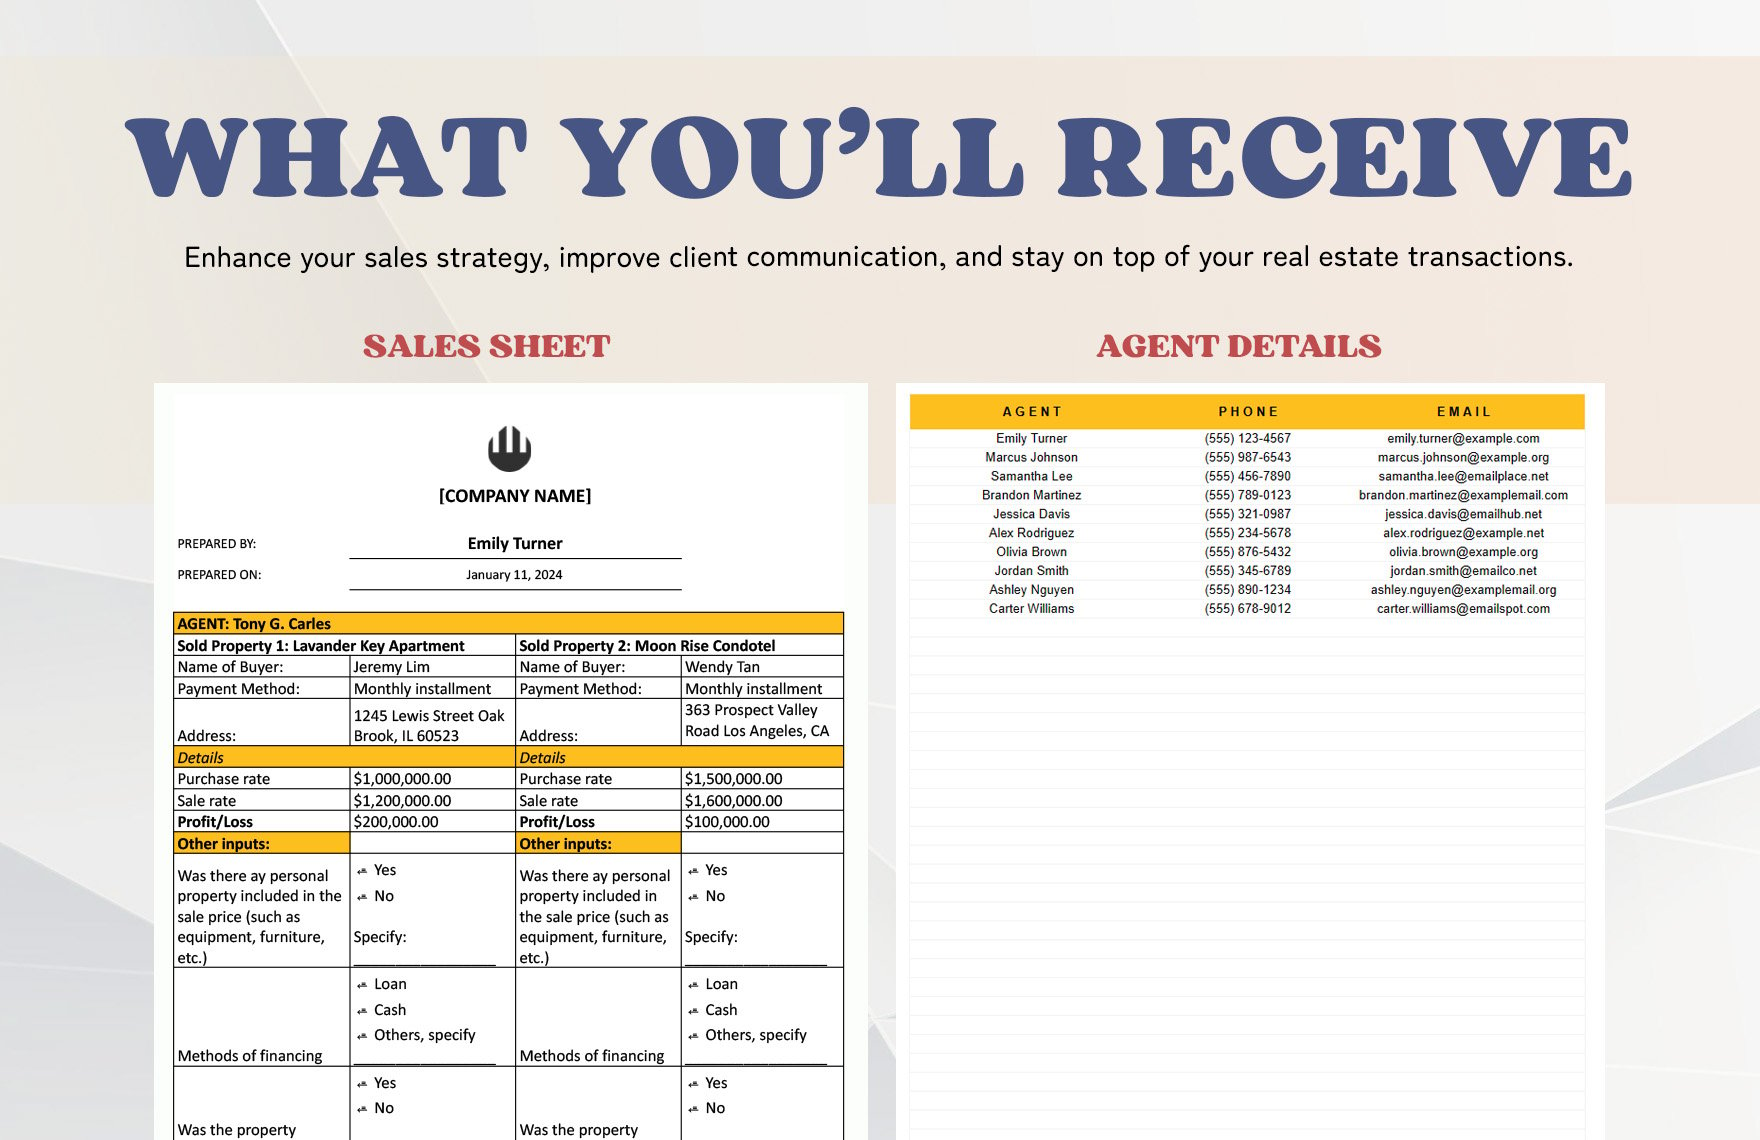 Real Estate Agent Sales Sheet Template